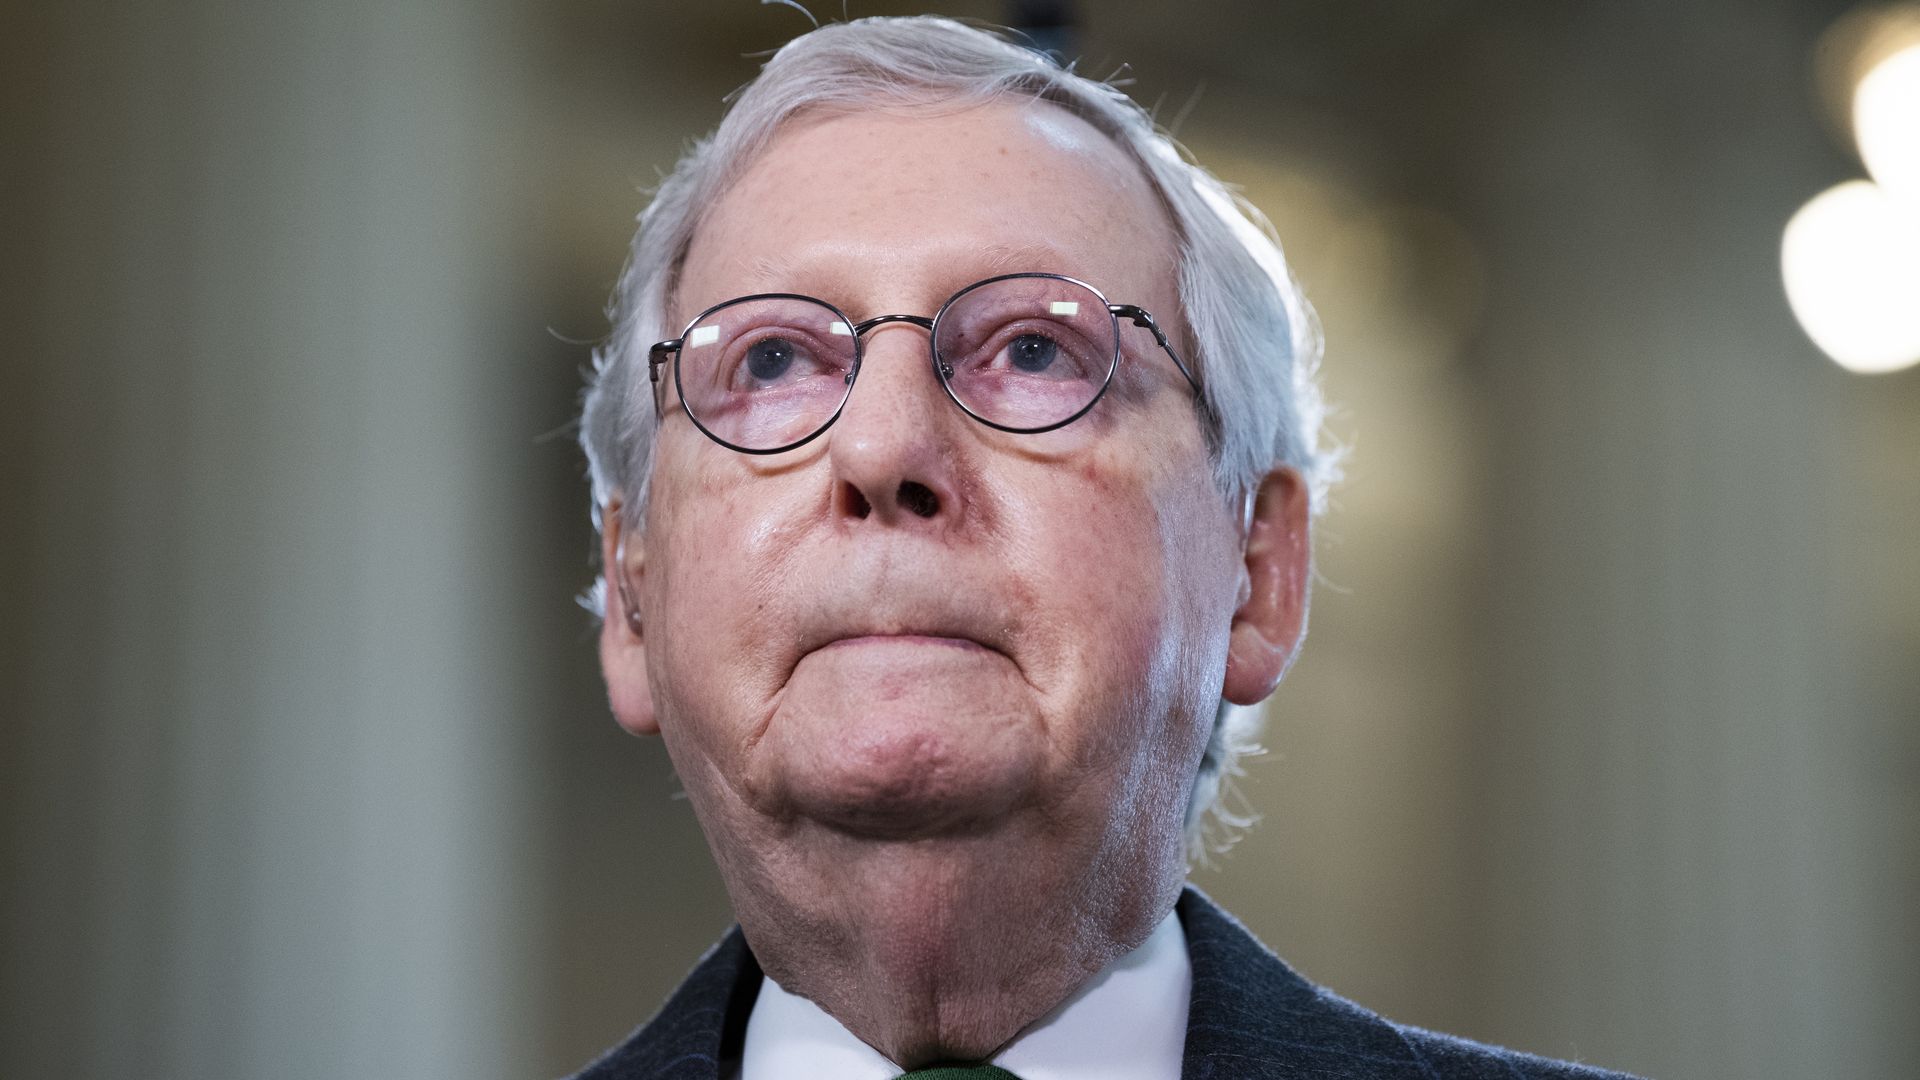 Senate Minority Leader Mitch McConnell in Washington, D.C., in March 2021.